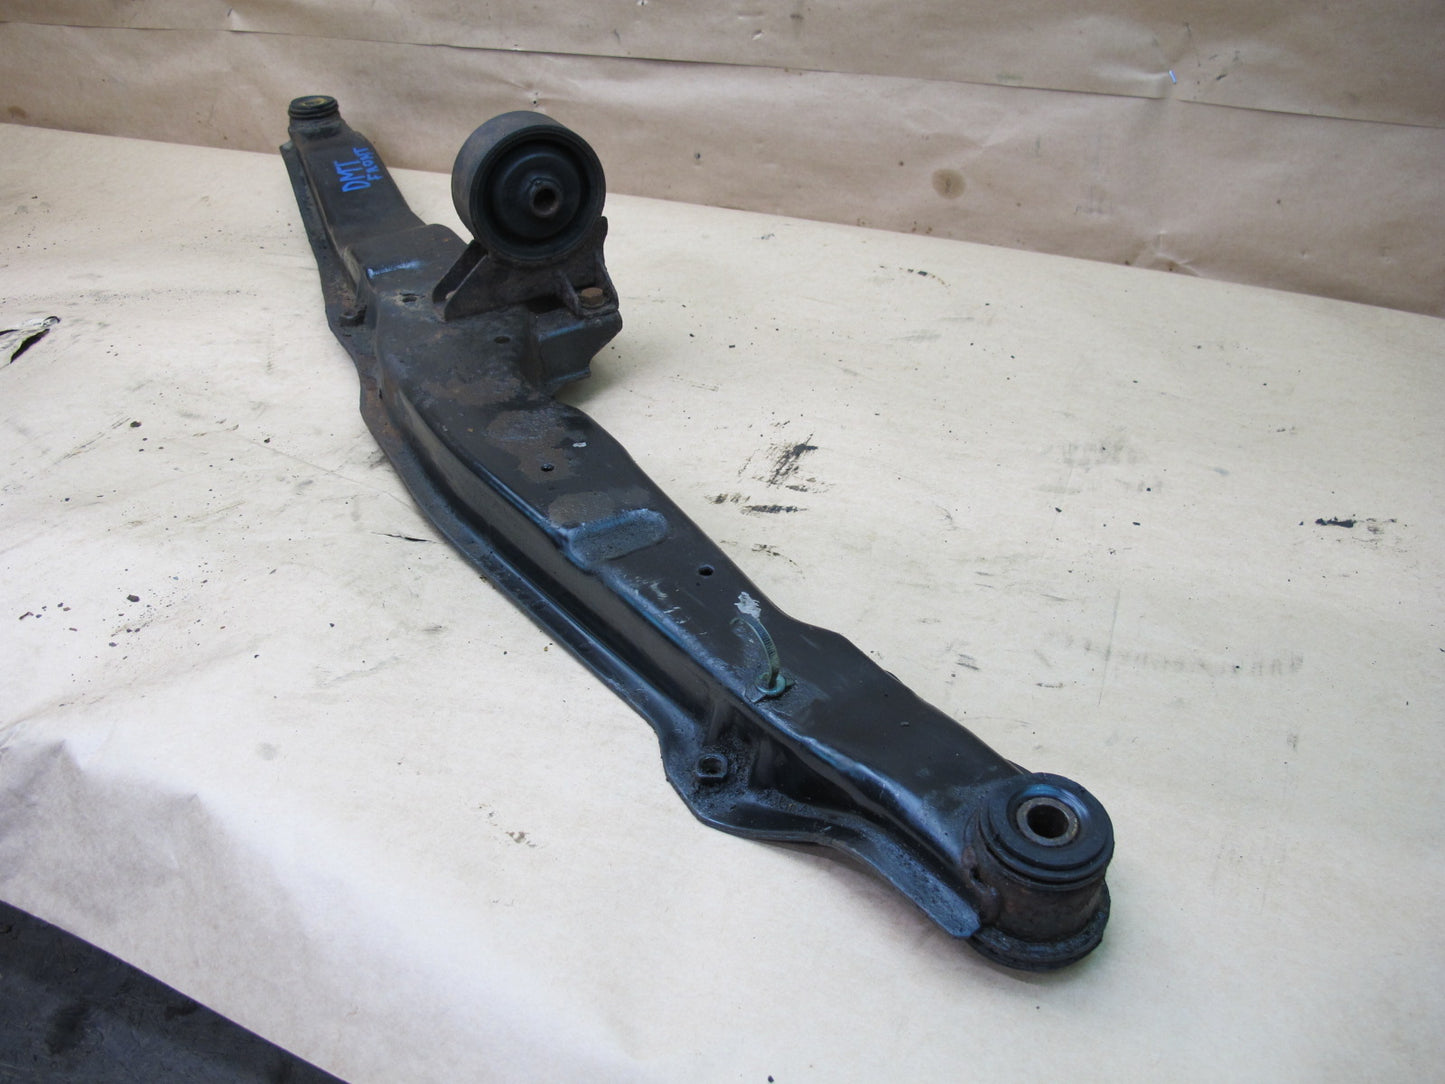 91-99 DODGE STEALTH 3000GT AWD TURBO FRONT SUBFRAME CROSSMEMBER W/ MOTOR MOUNT